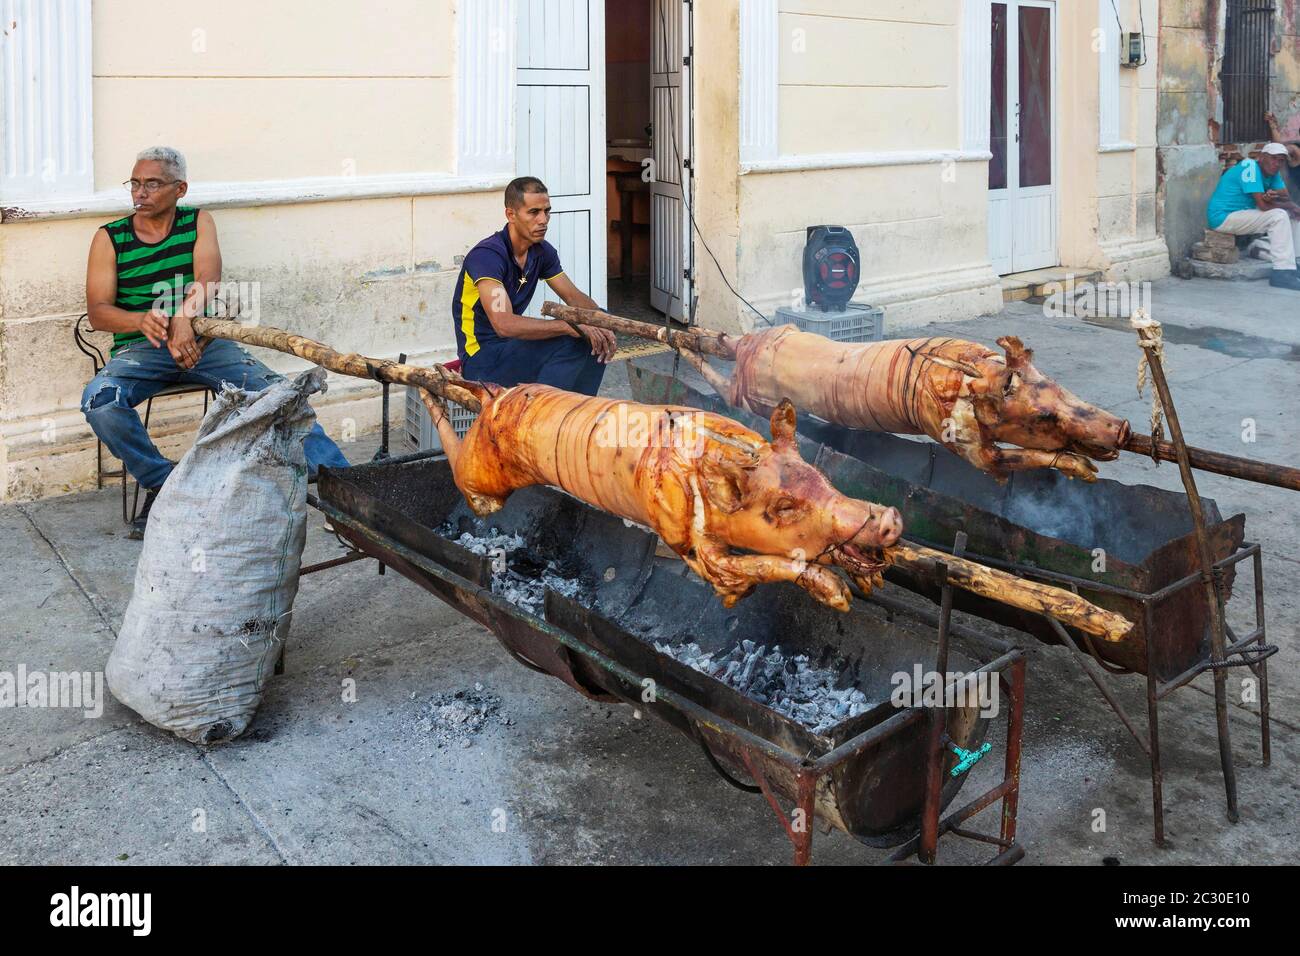 Roasting pigs in a pedestrian area of the town centre in order to subsequently sell meat portions to the public, Manzanillo, Cuba Stock Photo